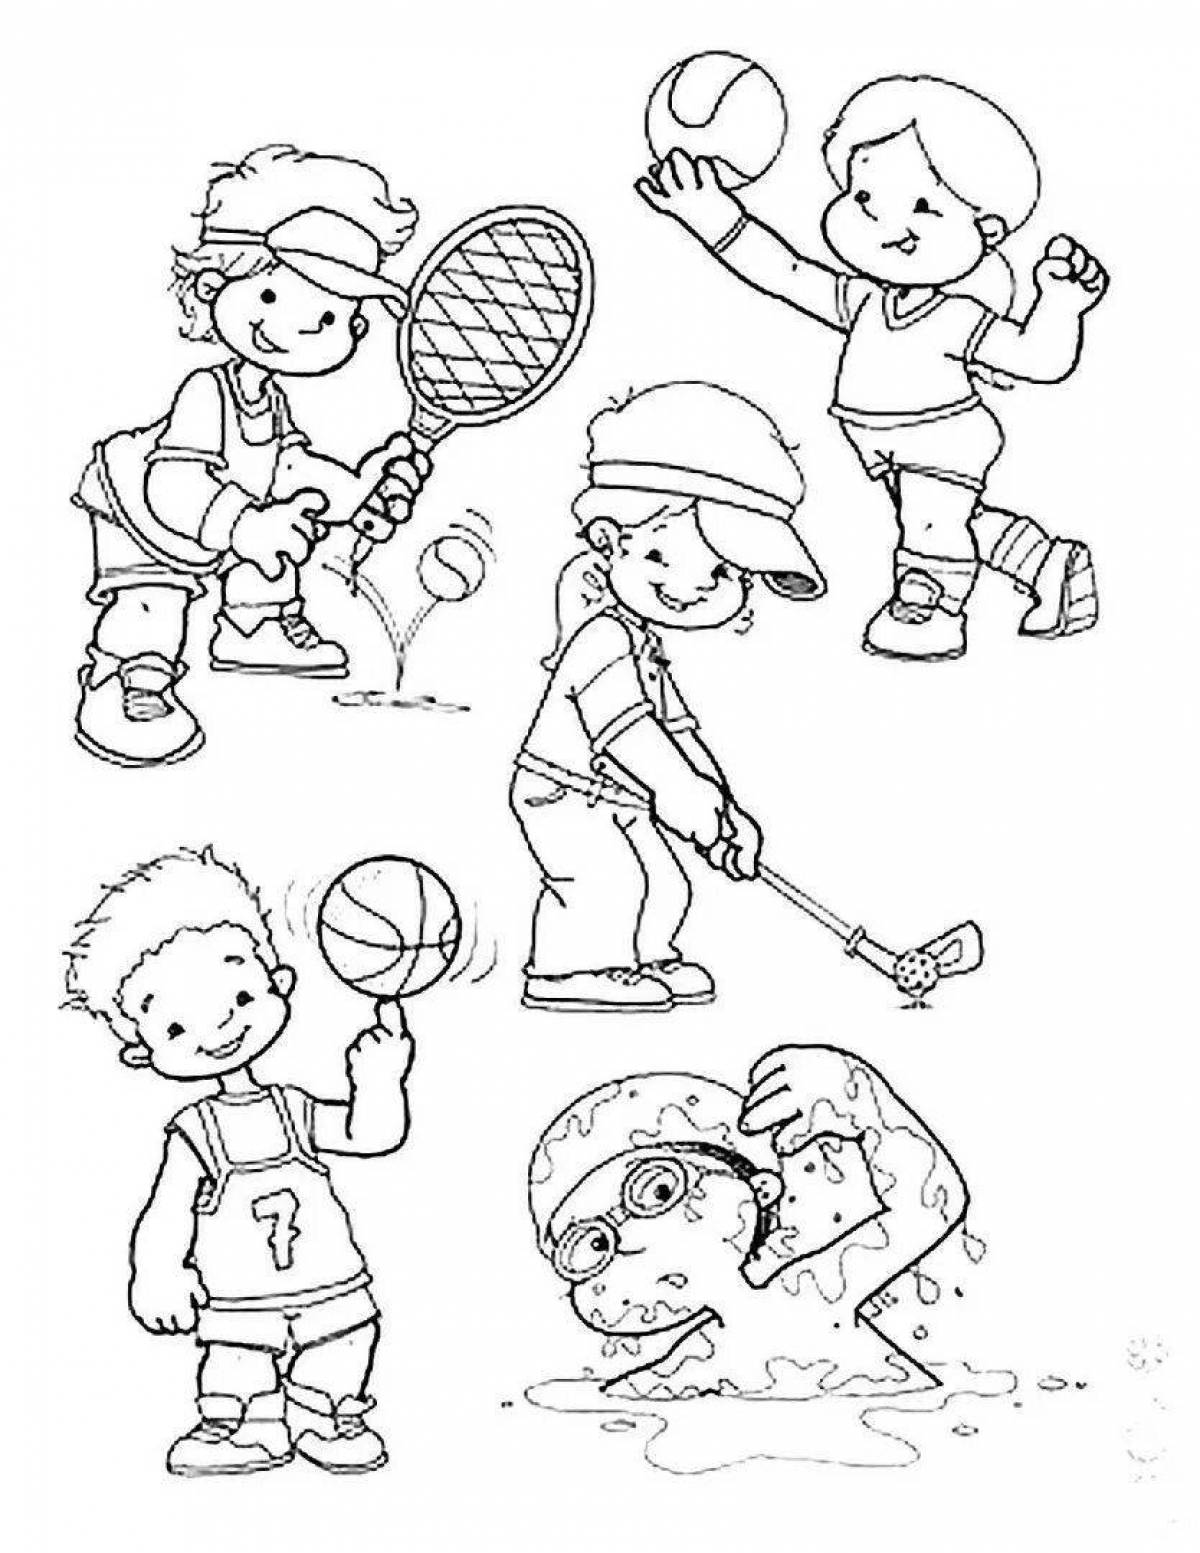 Playful sports coloring book for preschoolers